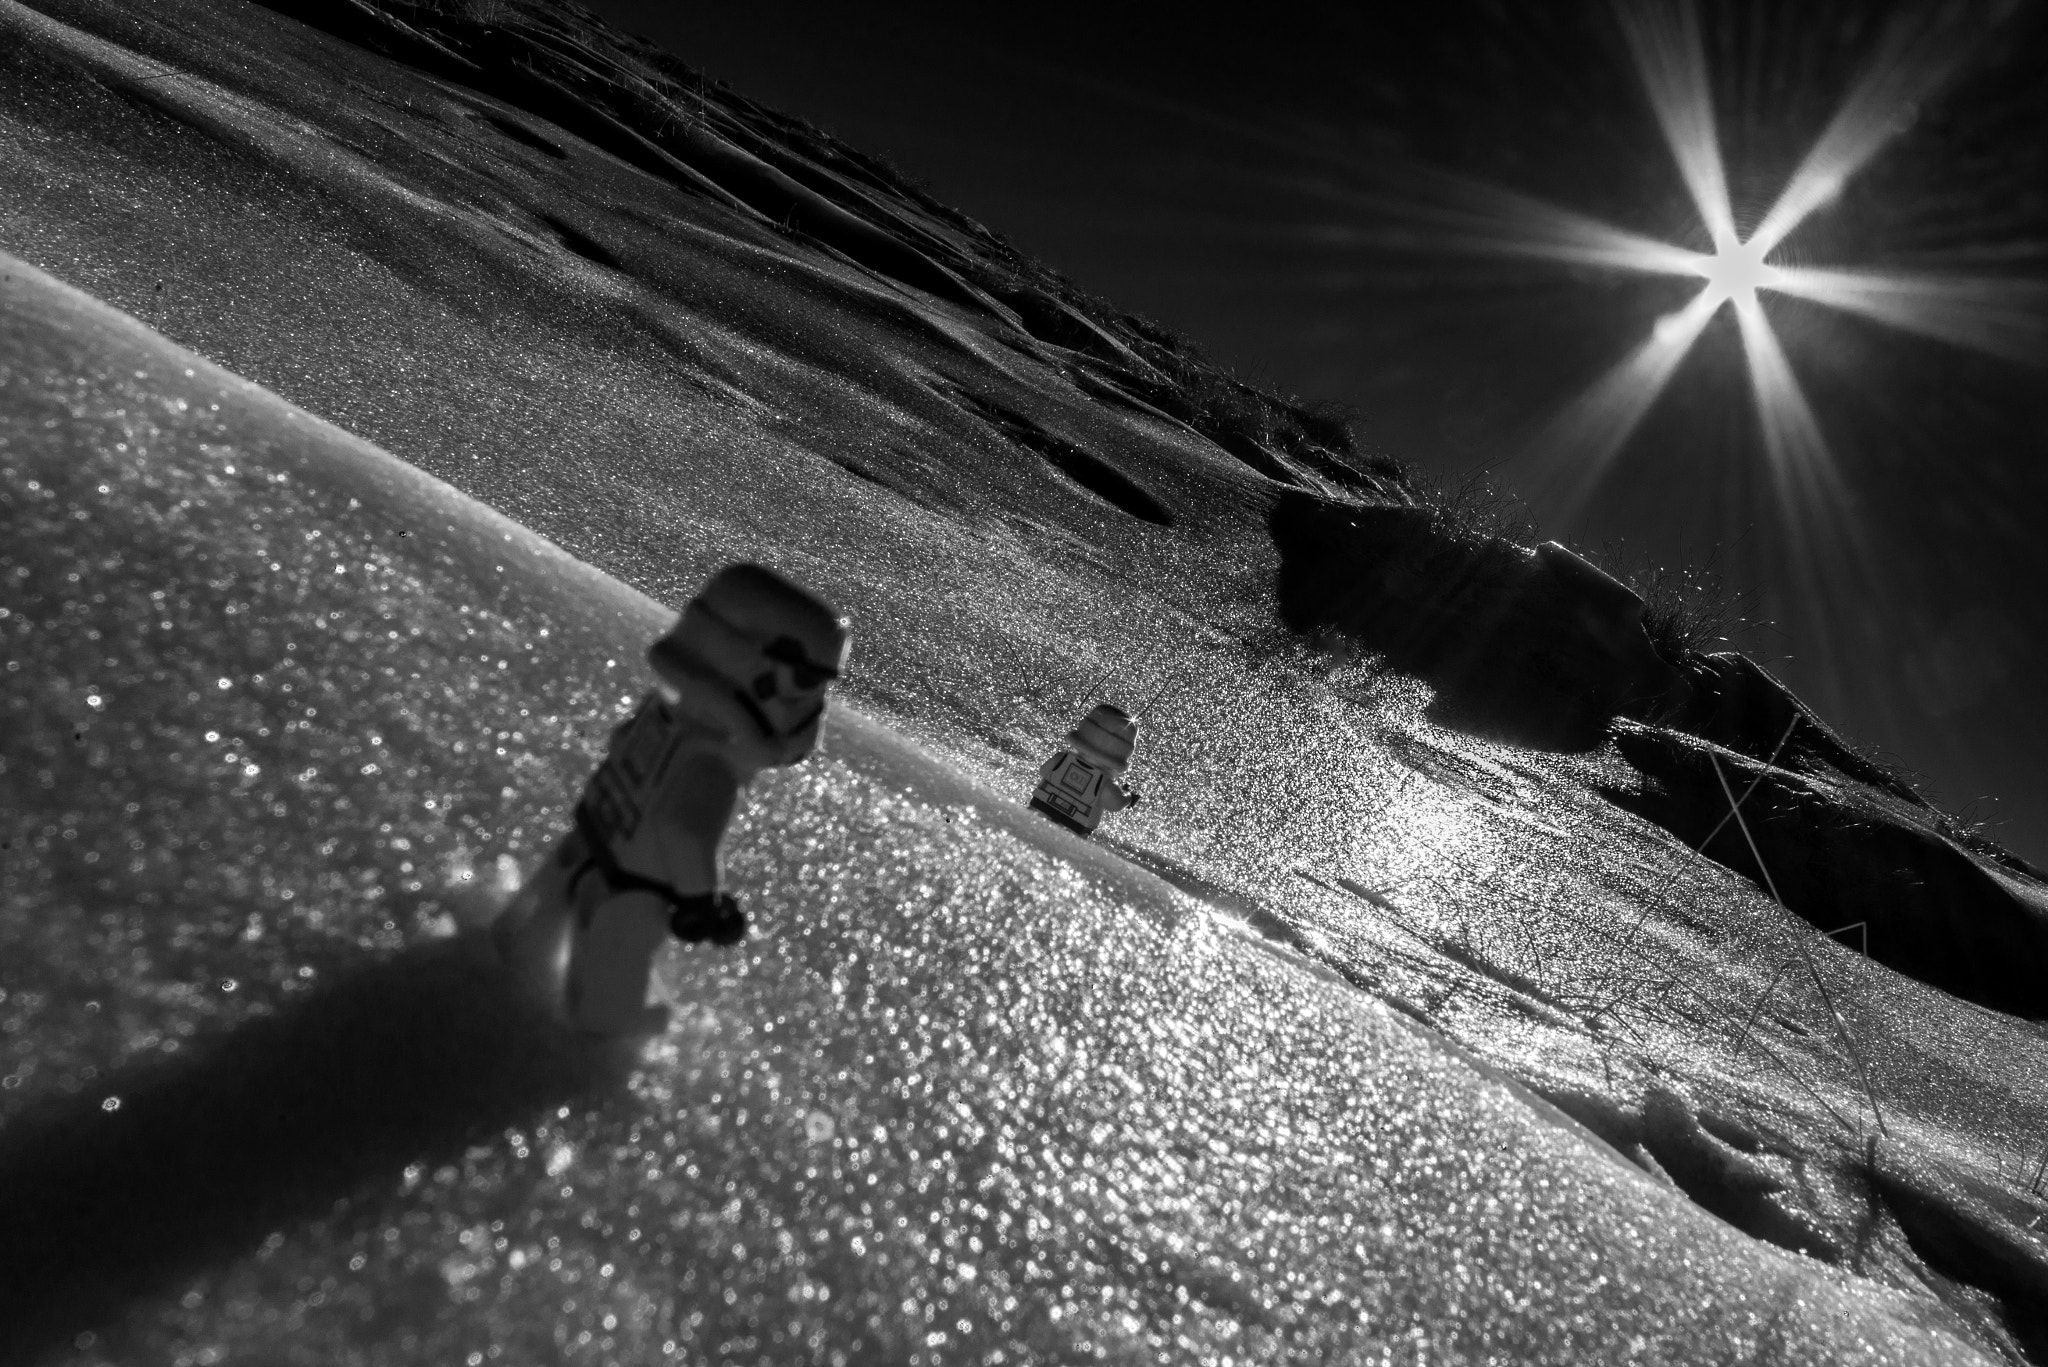 Nikon D610 sample photo. Stormtroopers @ same conditions of hoth photography